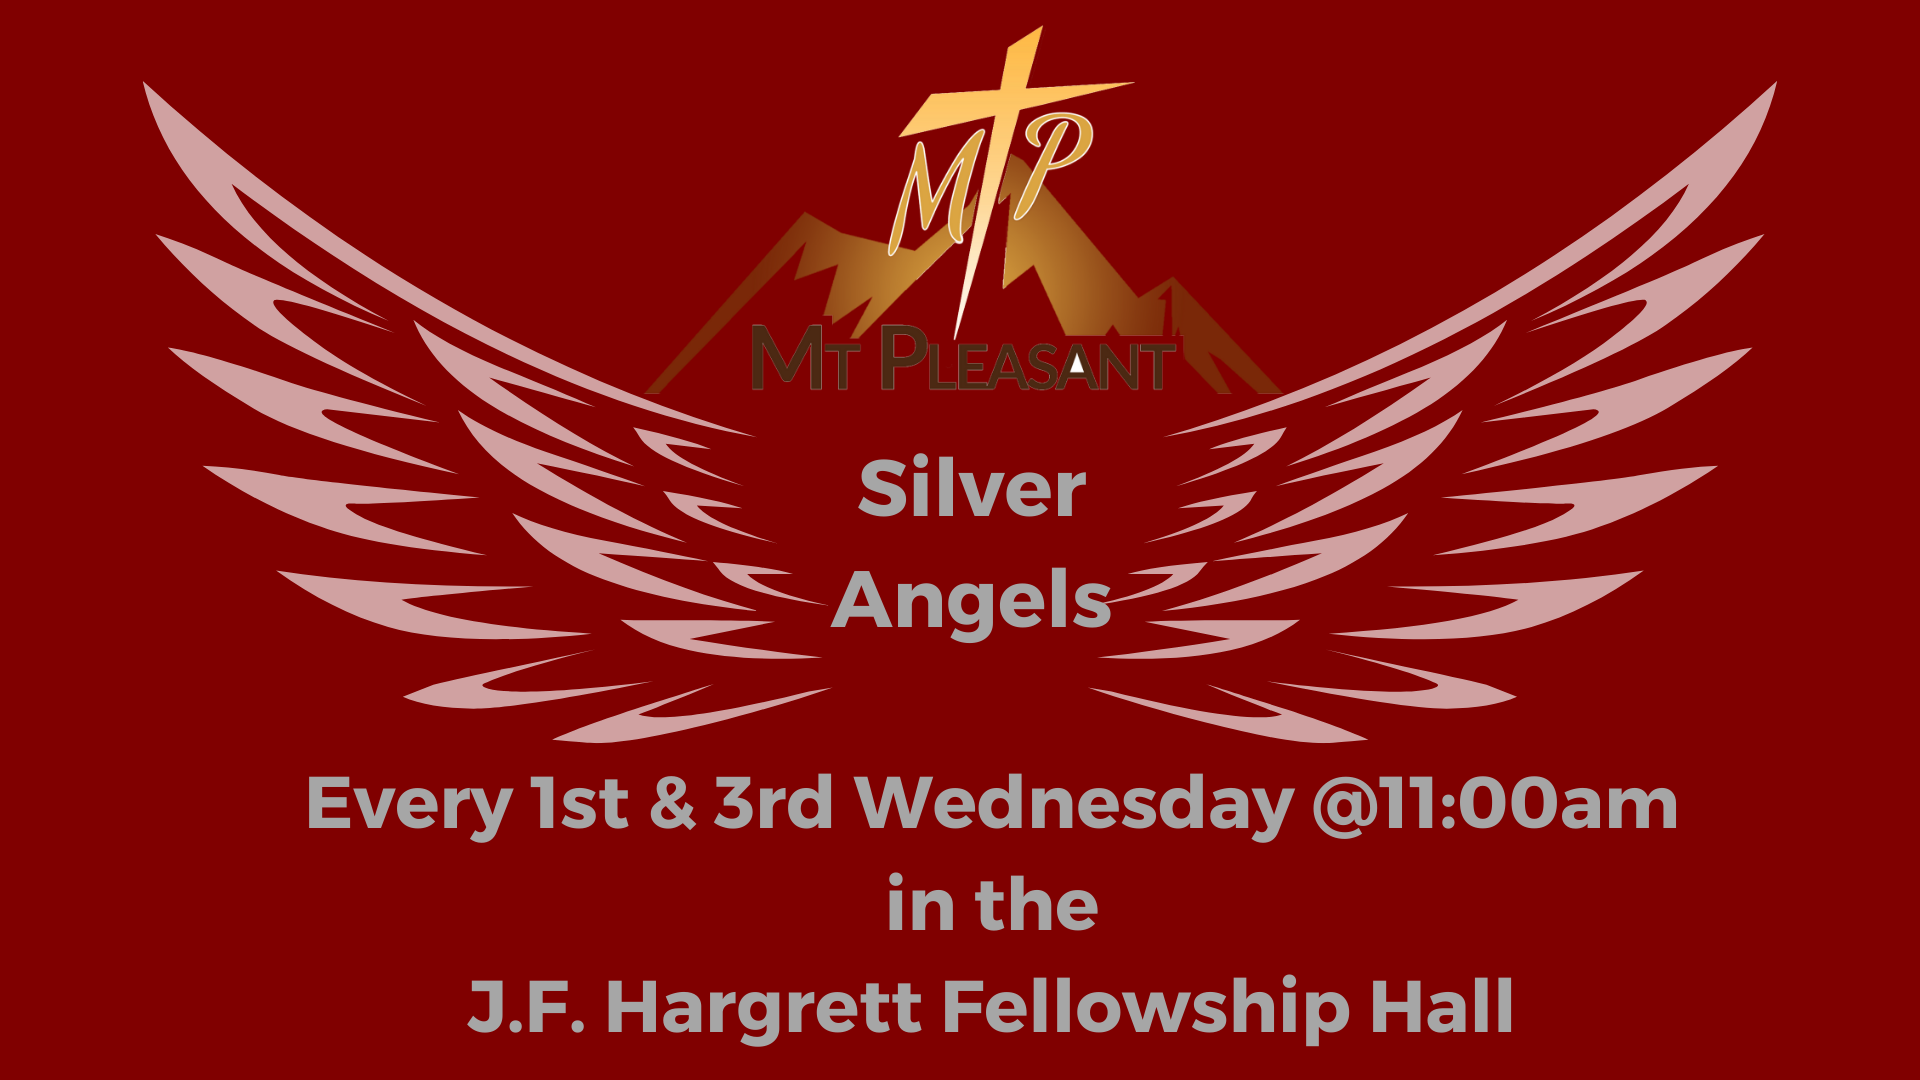 Silver Angels